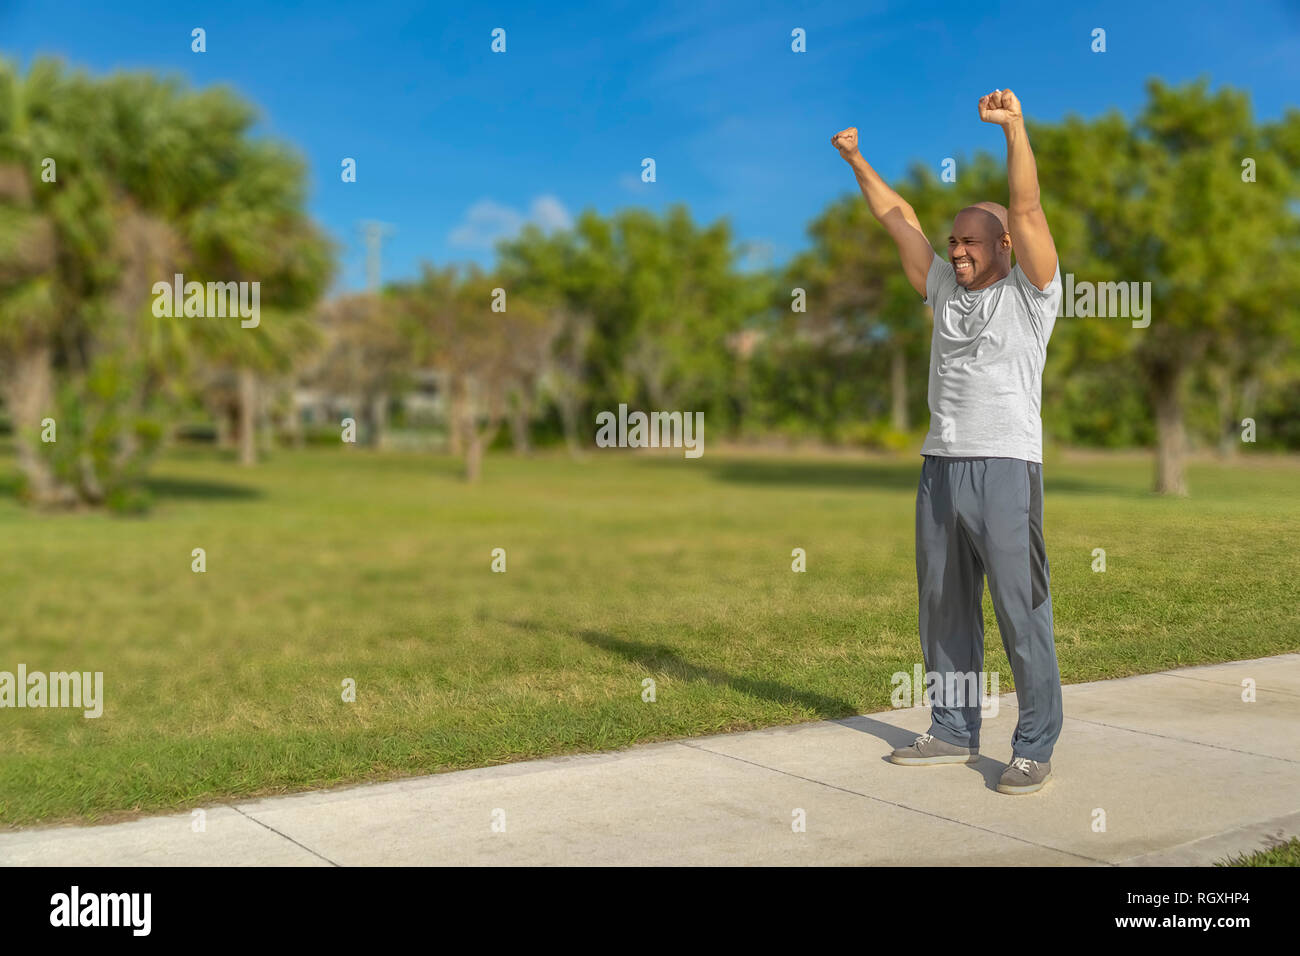 A black man shows his victory excitement by stretching his arms up high with a smile standing on the running path at the park. Stock Photo